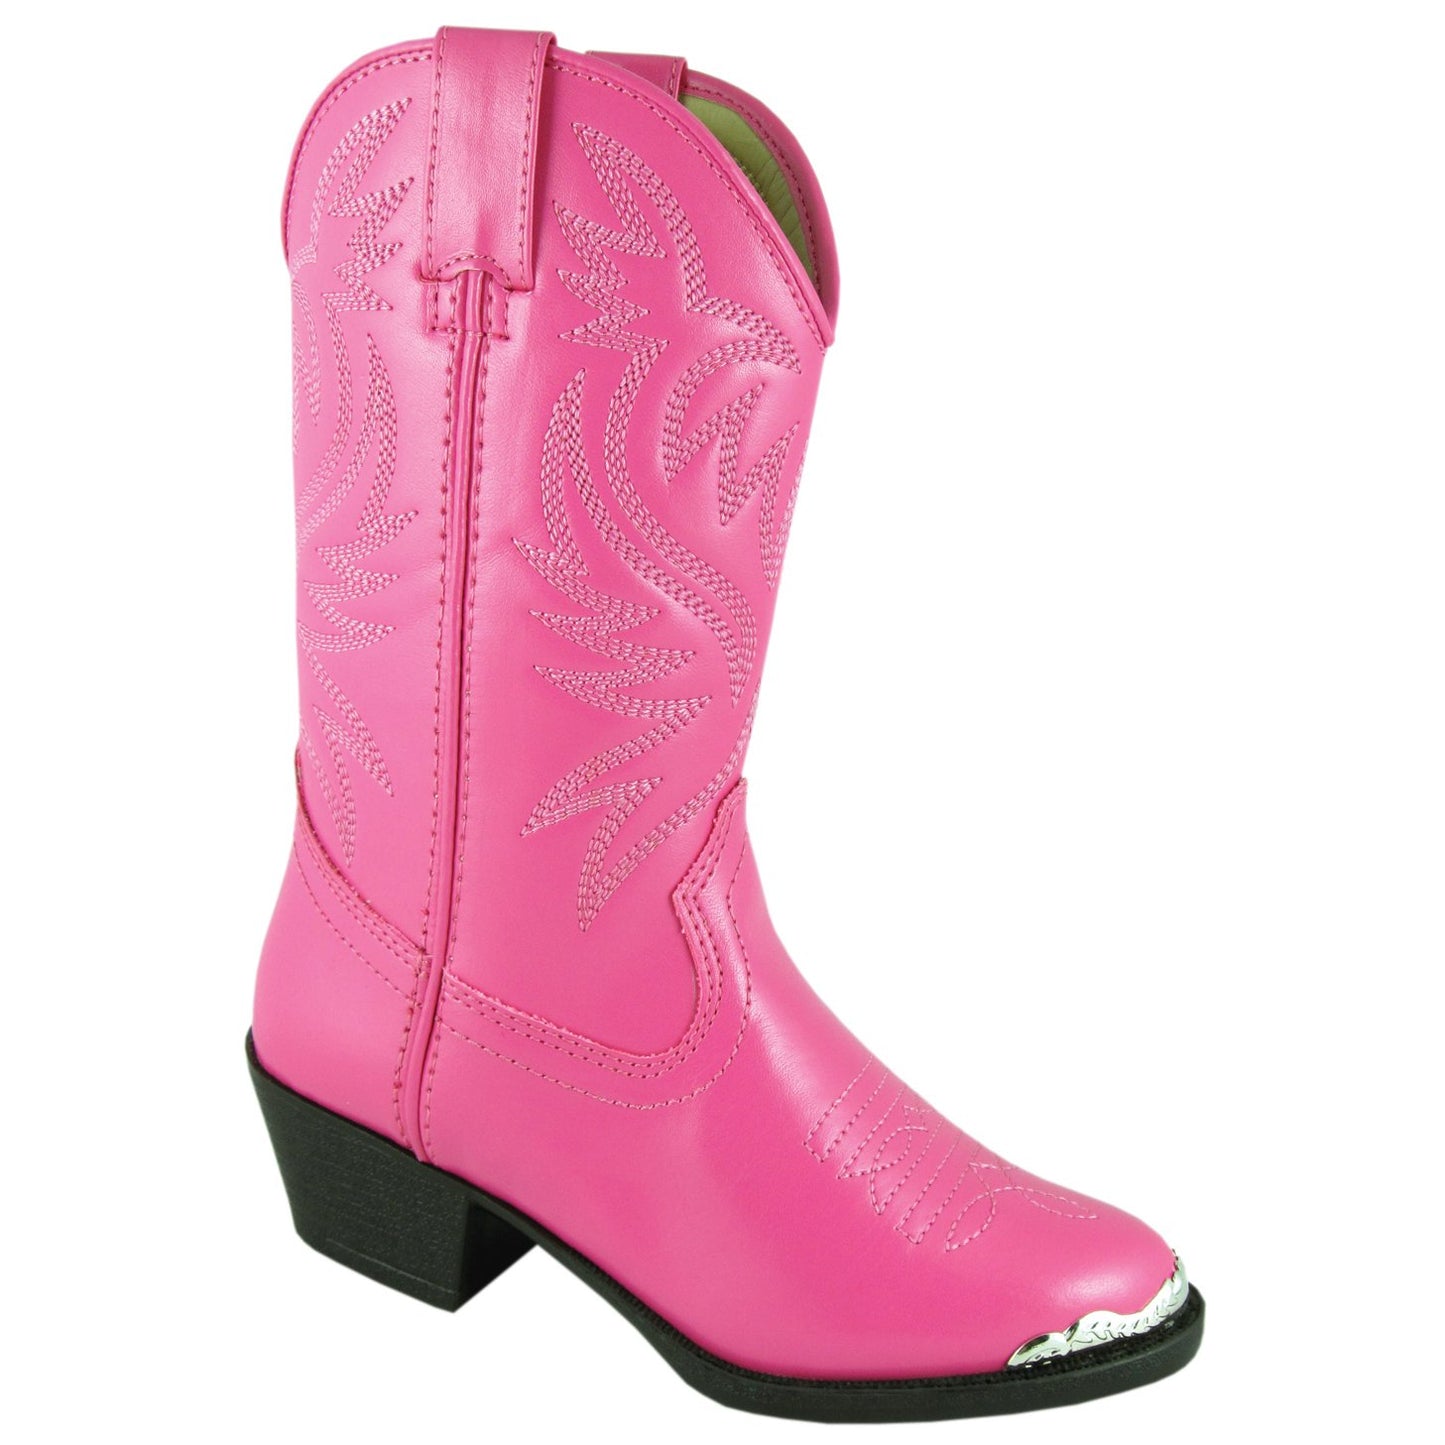 Smoky Mountain Girl's Youth Hot Pink Western Boot